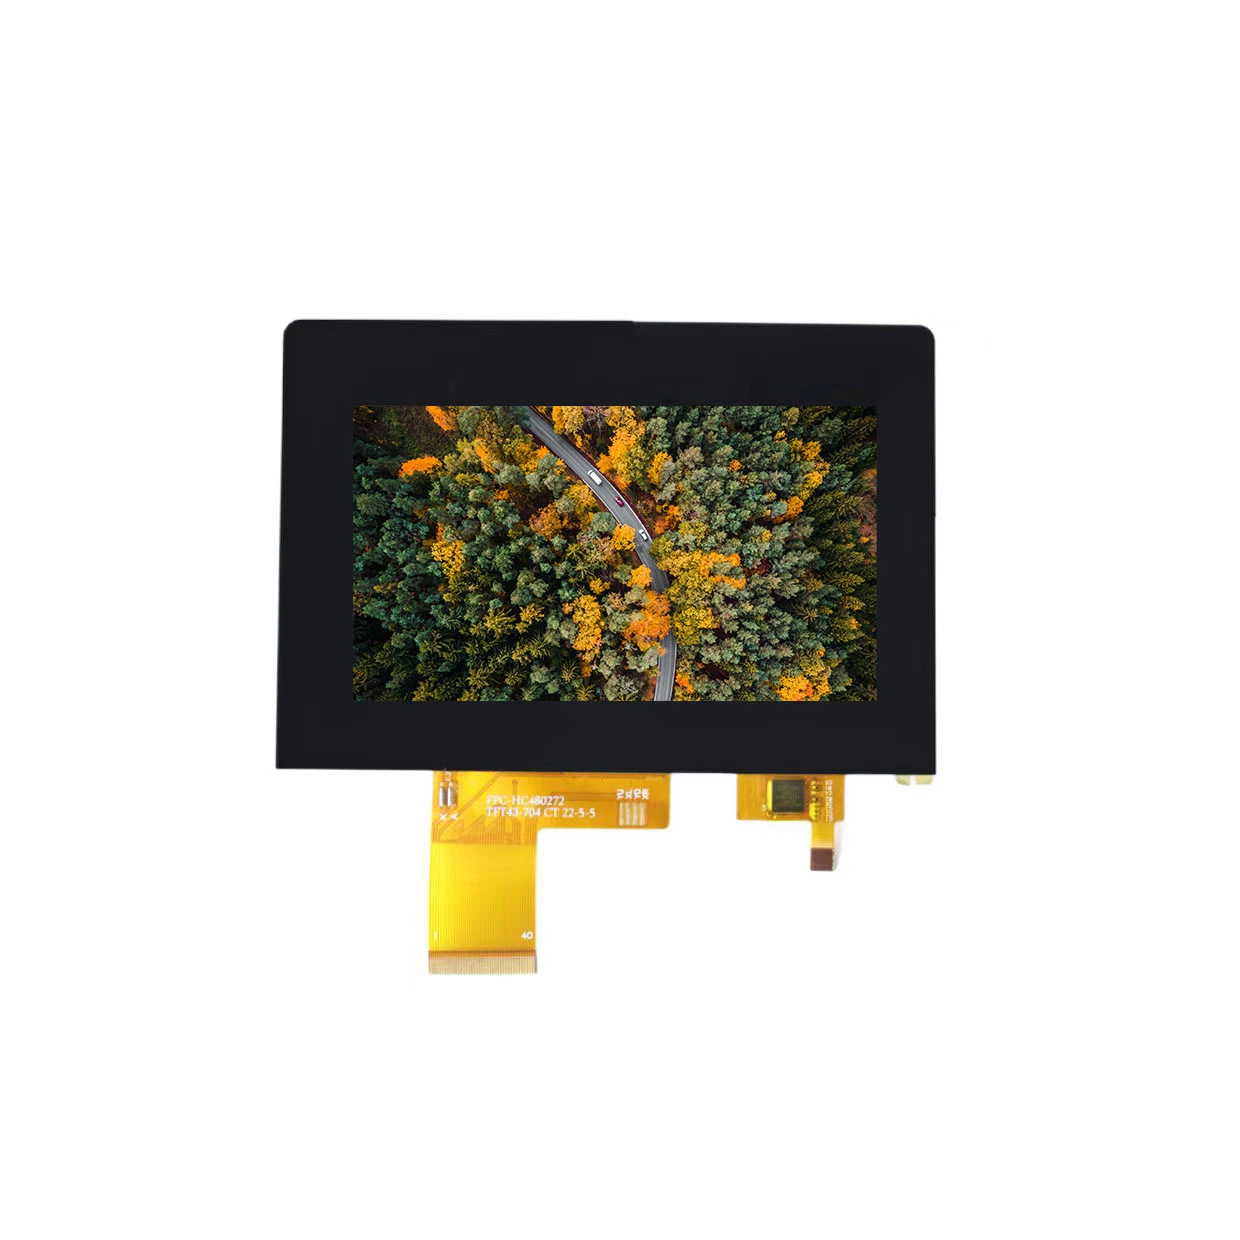 4.3 Inch IPS 480*272 Resolution LCD Display Module Capacitive Touch Screen